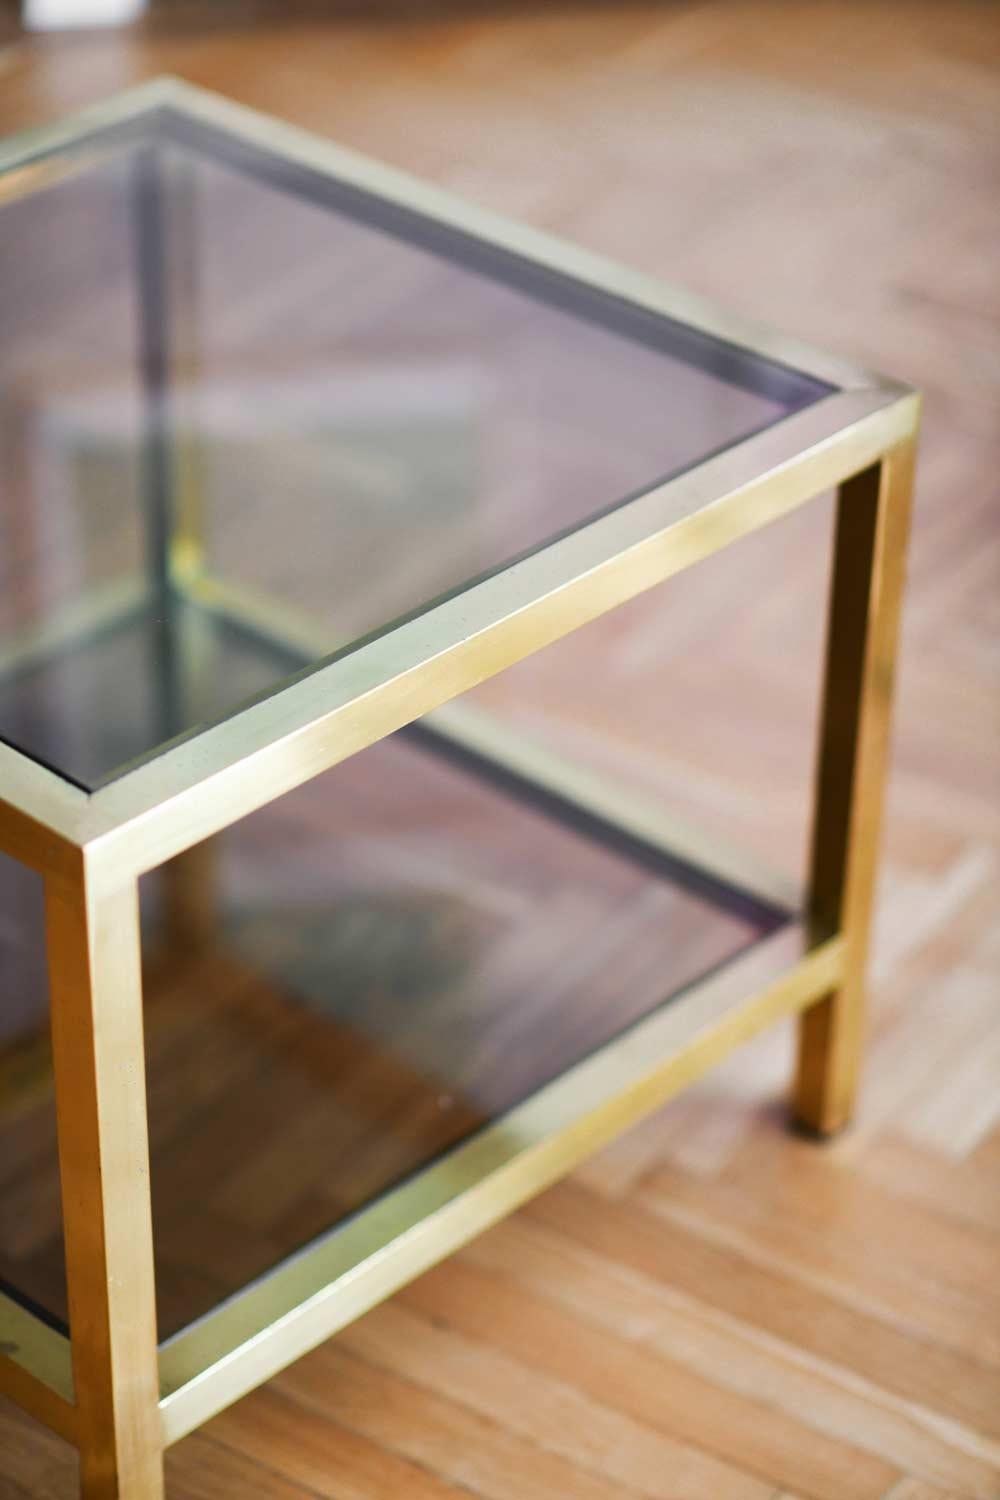 Pair of 70's coffee tables in brass and brown glass with two shelves.
1970s Italian manufacture.